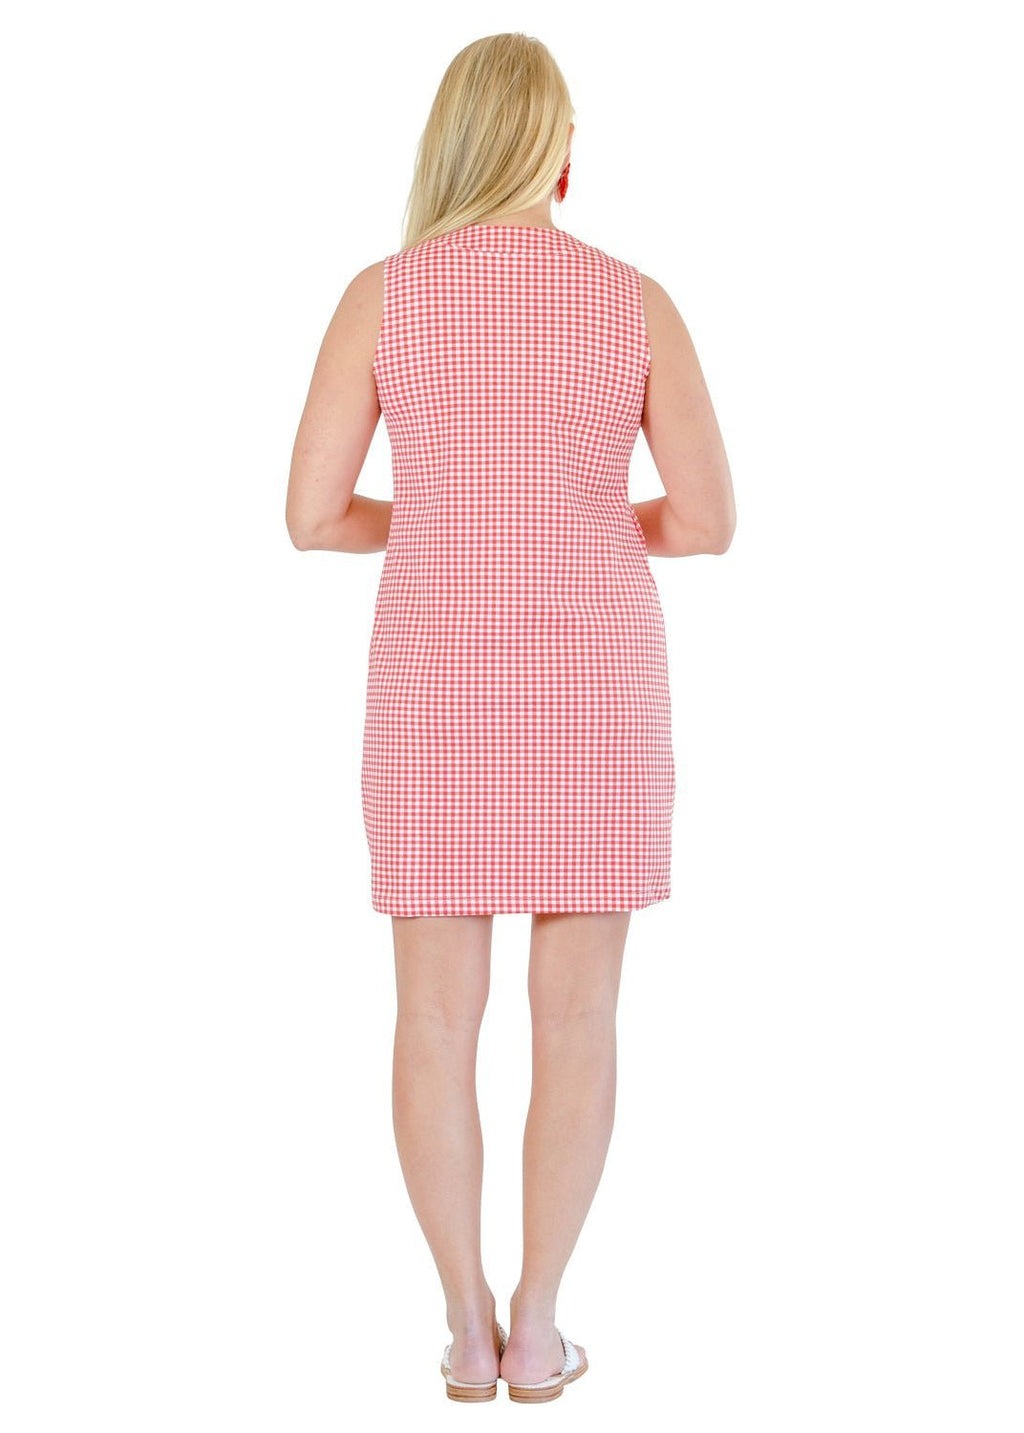 Lucille Dress - Gingham Check Red/White-2